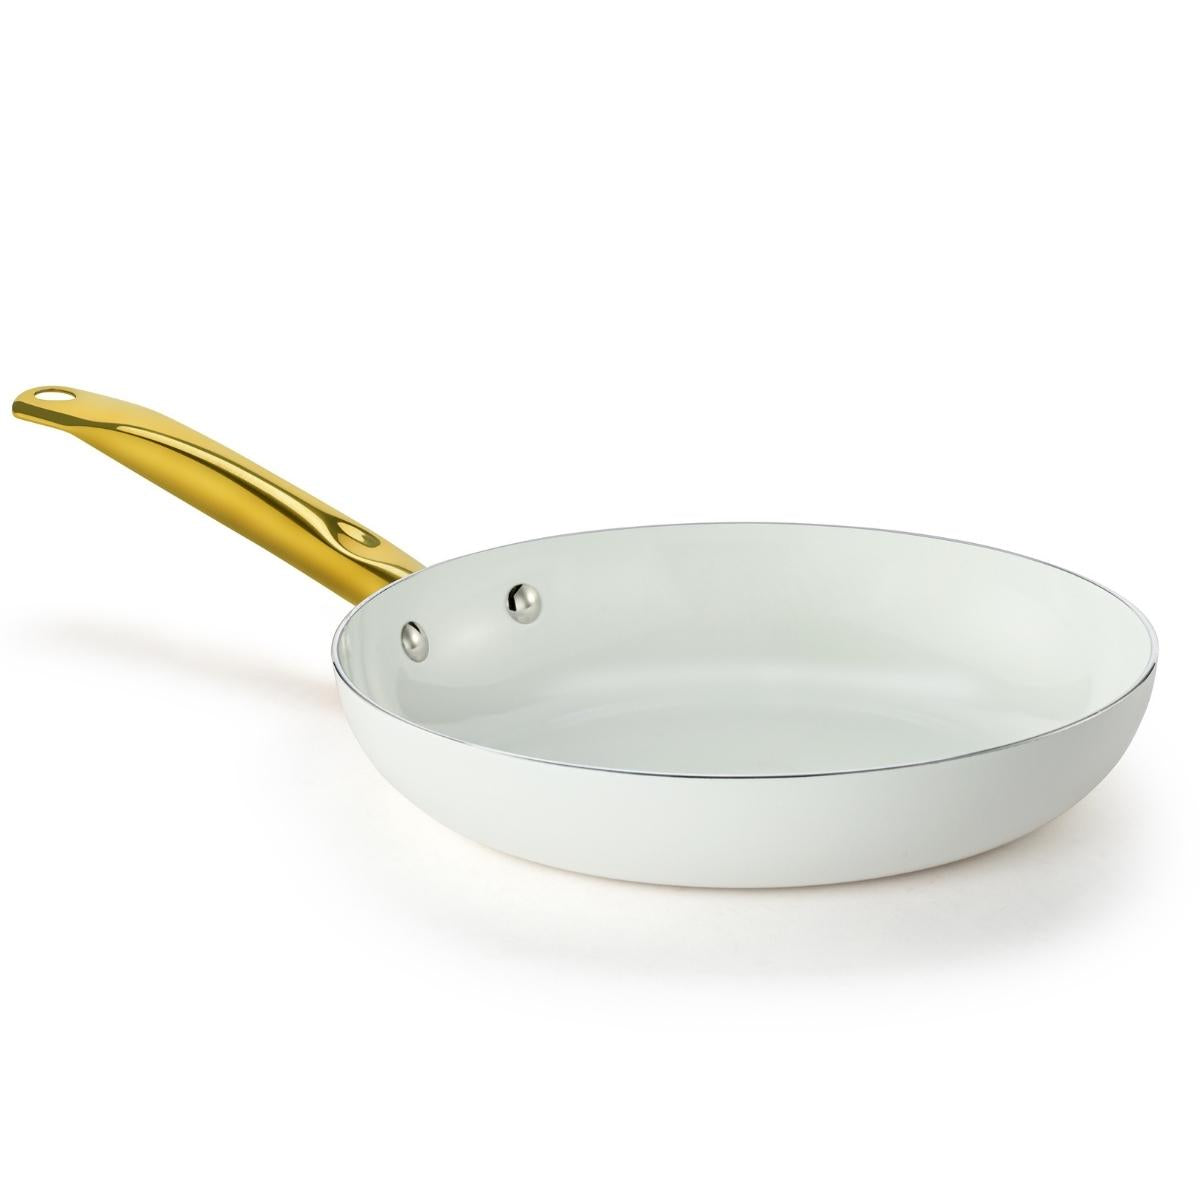 8-INCH CERAMIC NONSTICK FRY PAN WHITE & GOLD COLOR